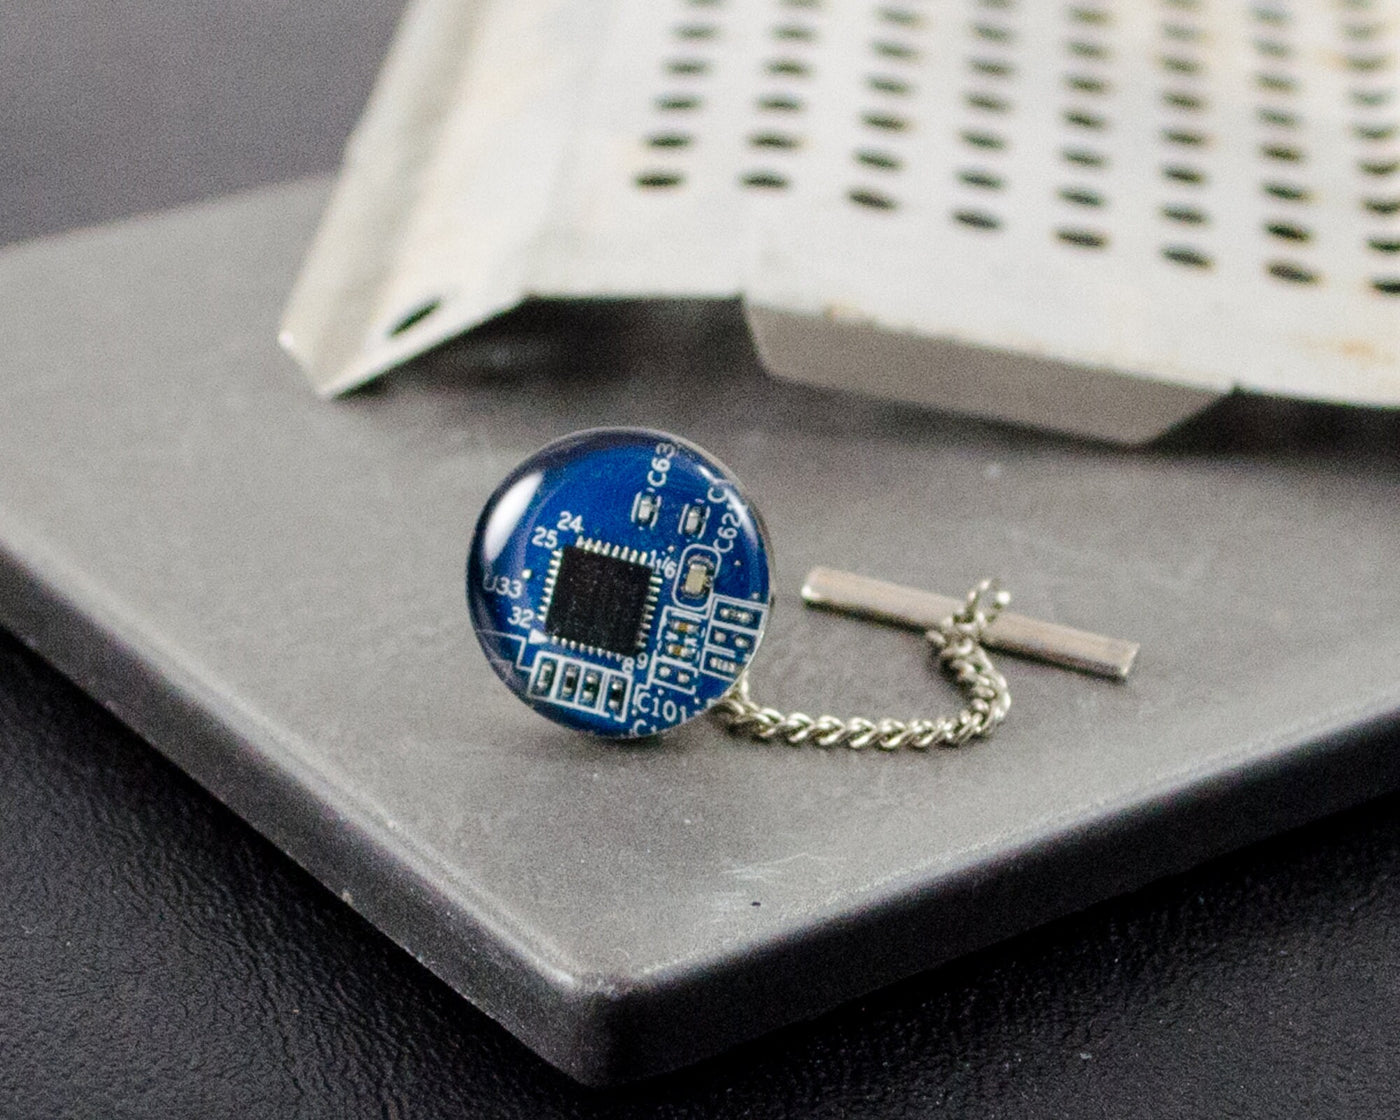 Blue Circuit Board Tie Tack, Technology Jewelry, Electrical Engineer Graduation Gift, Computer Scientist Gift, Techie Tie Jewelry